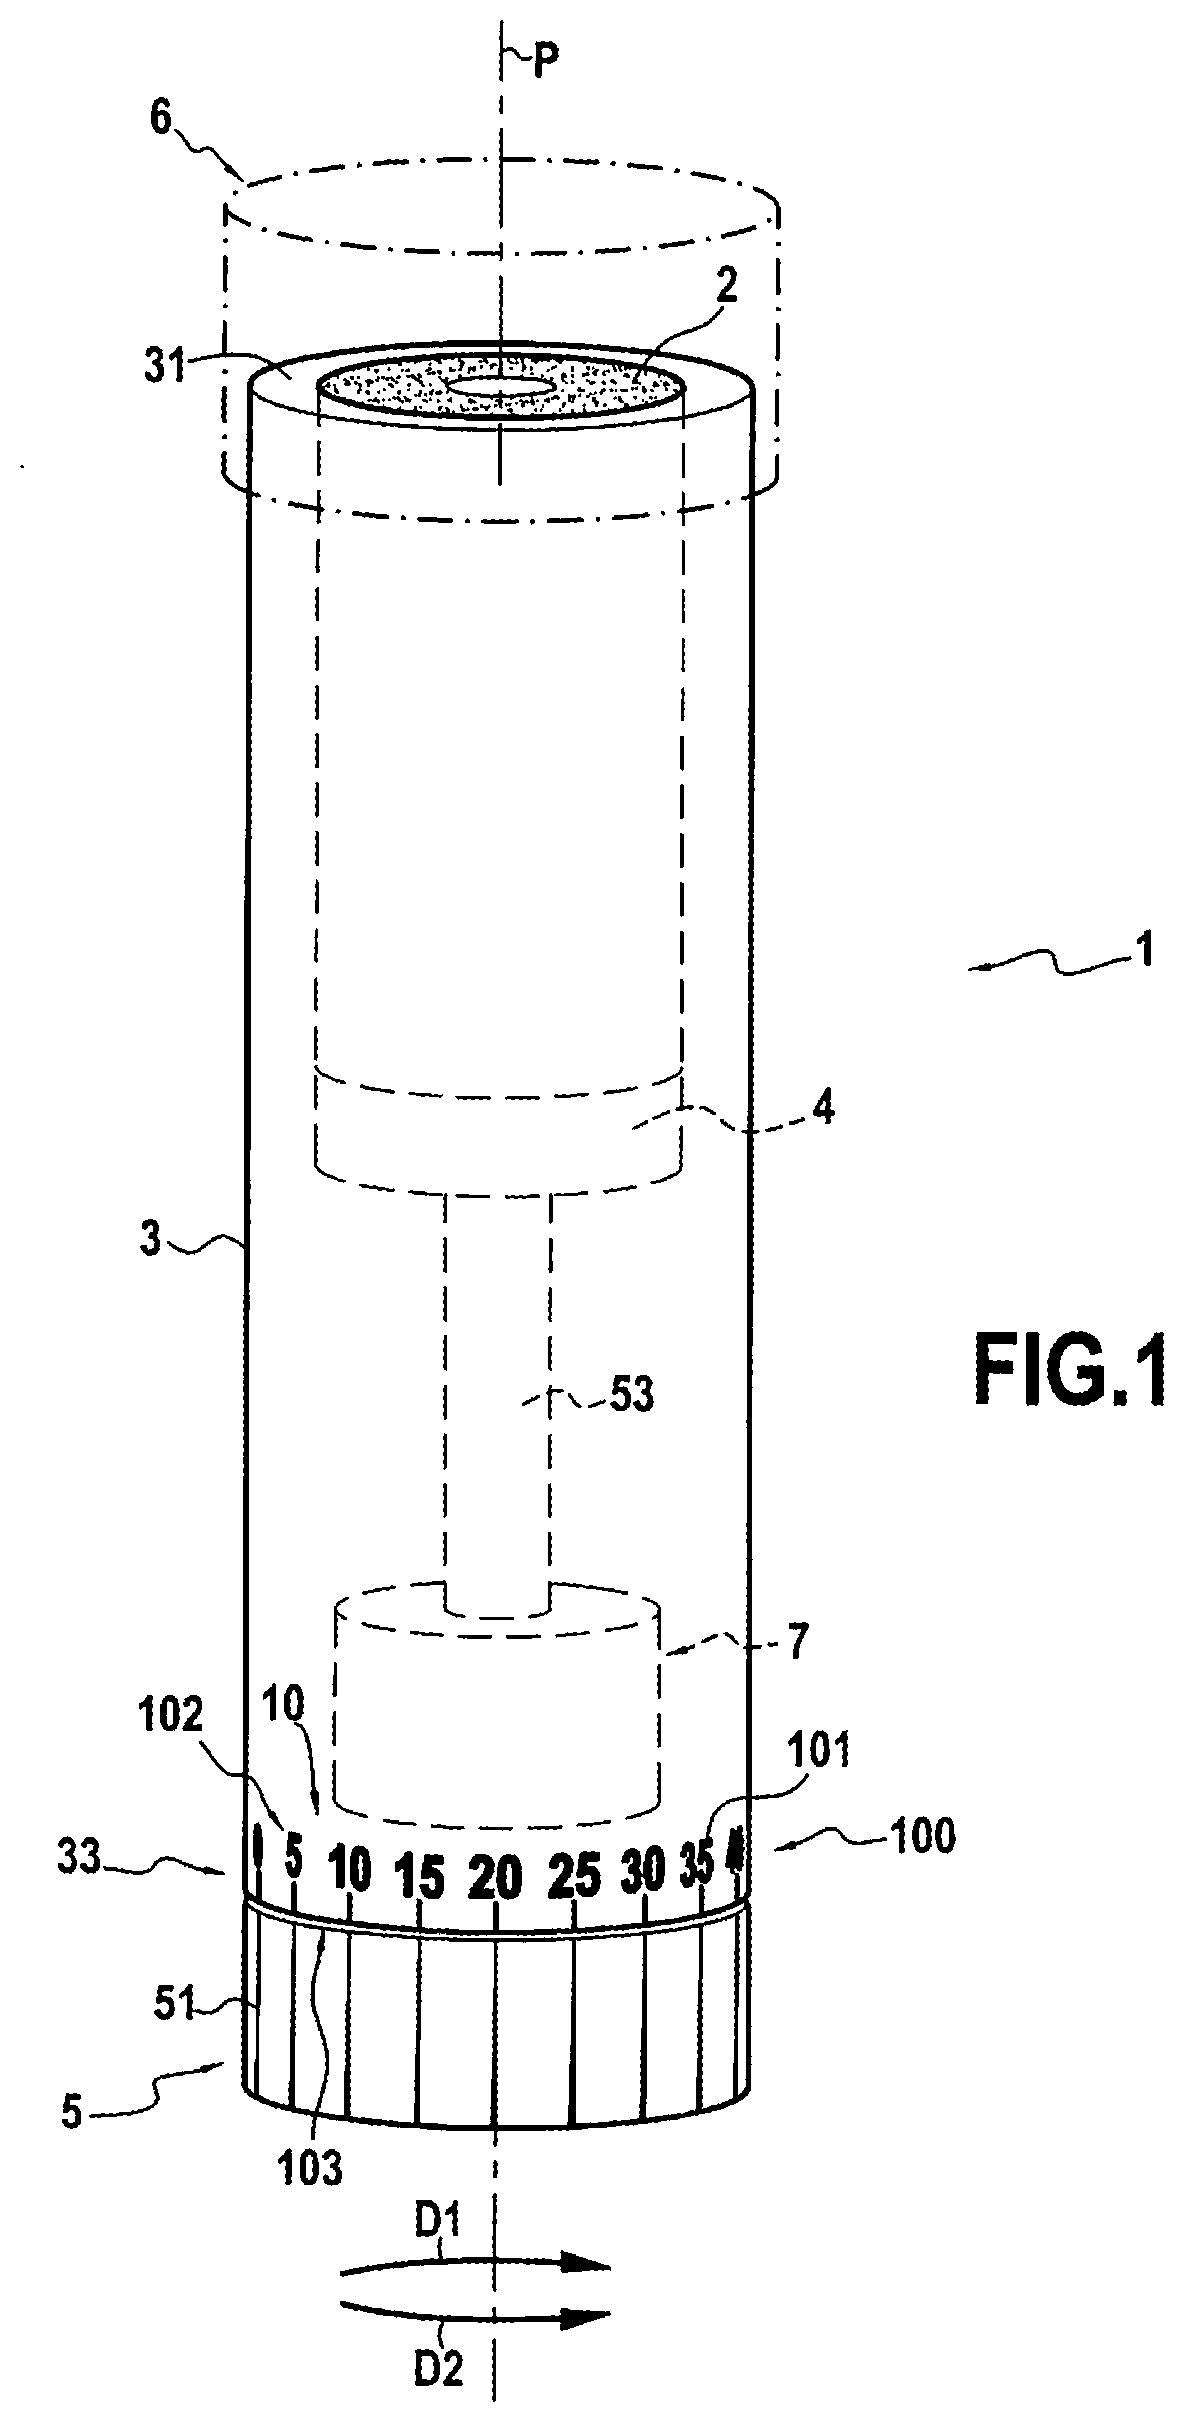 Applicator device with automatic retraction